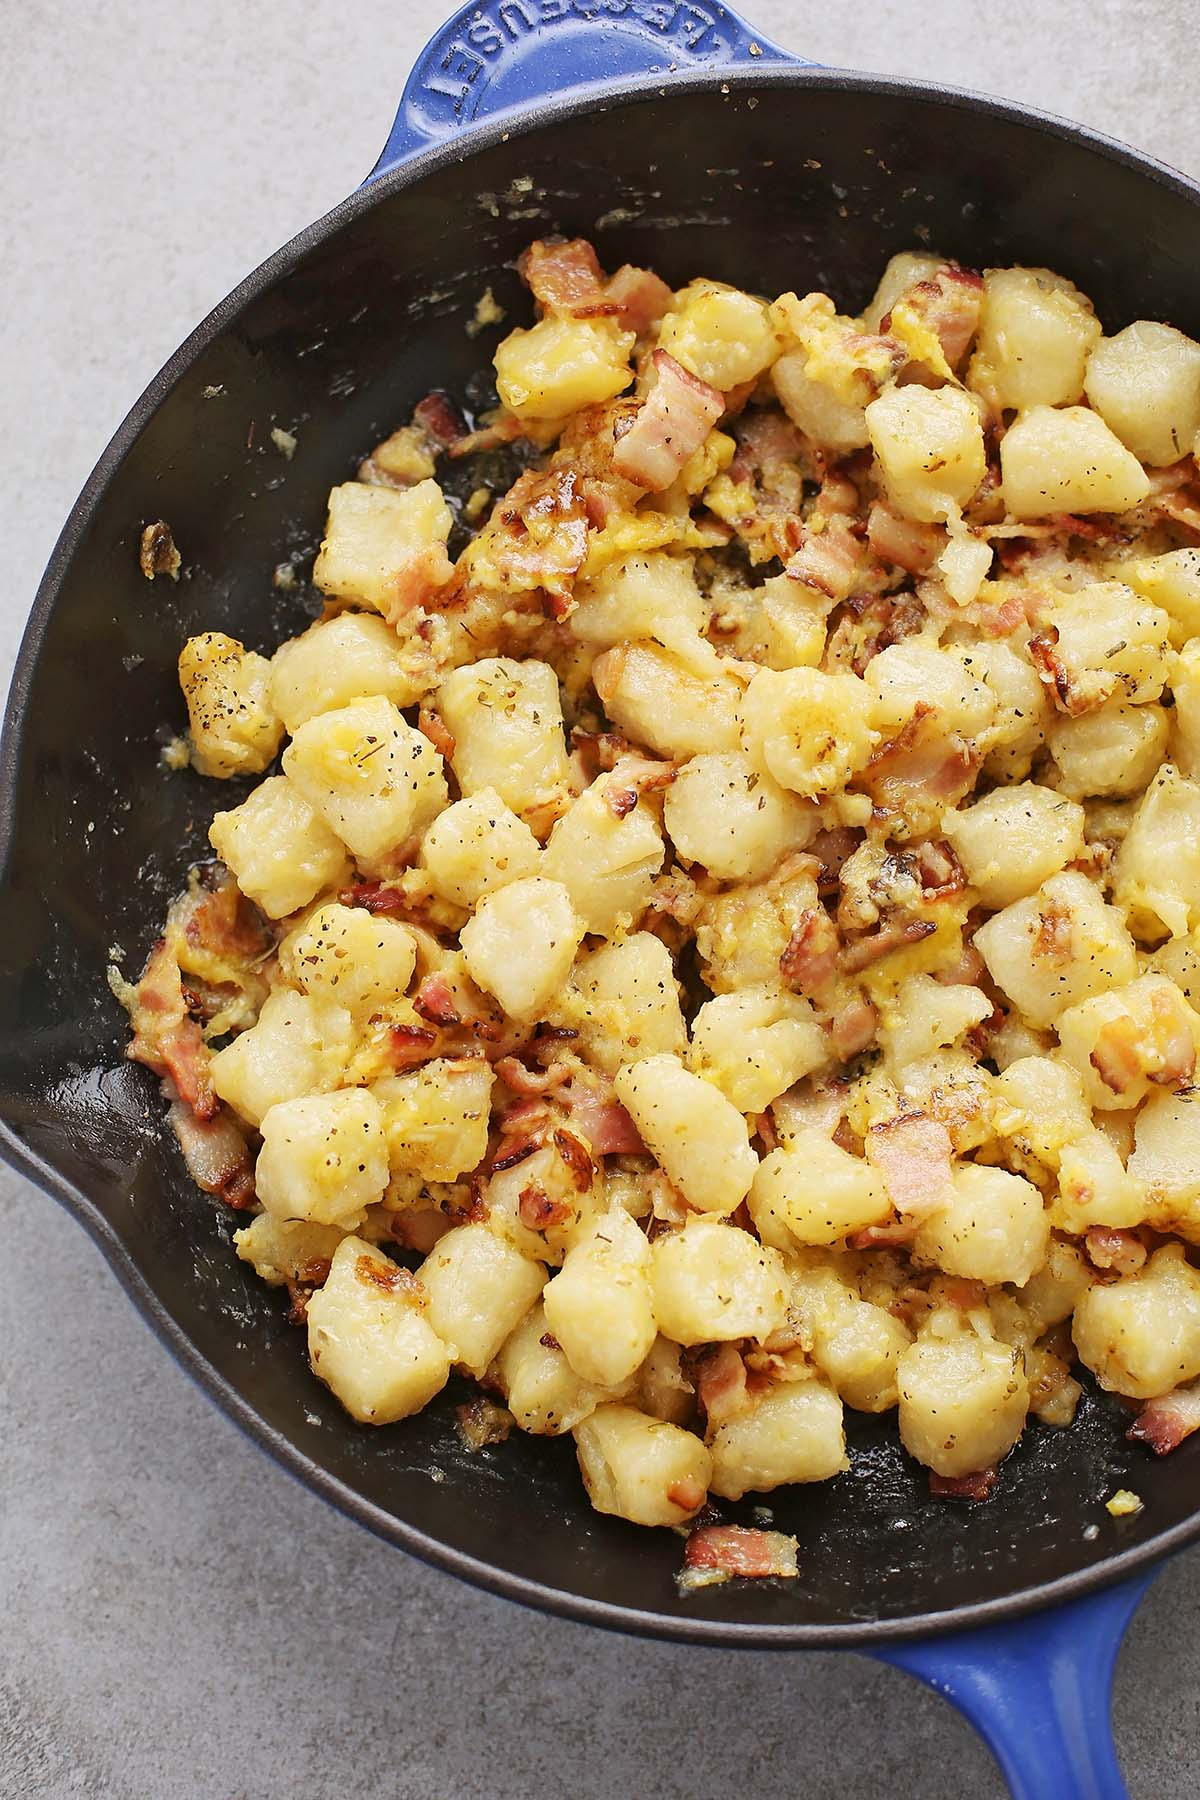 large cat iron skillet with gnocchi, bacon and yellow sauce